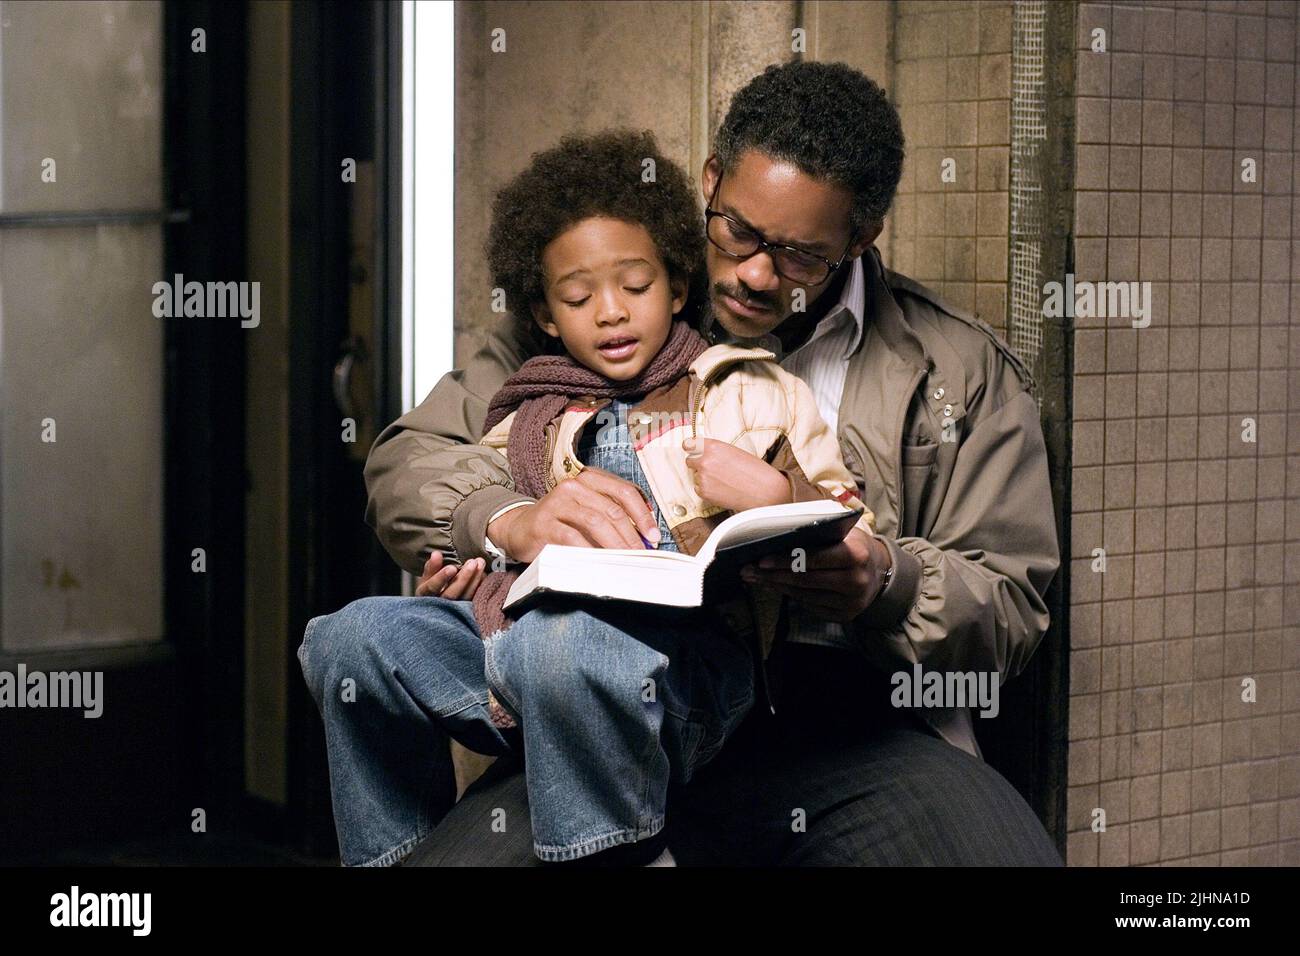 JADEN SMITH, WILL SMITH, THE PURSUIT OF HAPPYNESS, 2006 Stock Photo